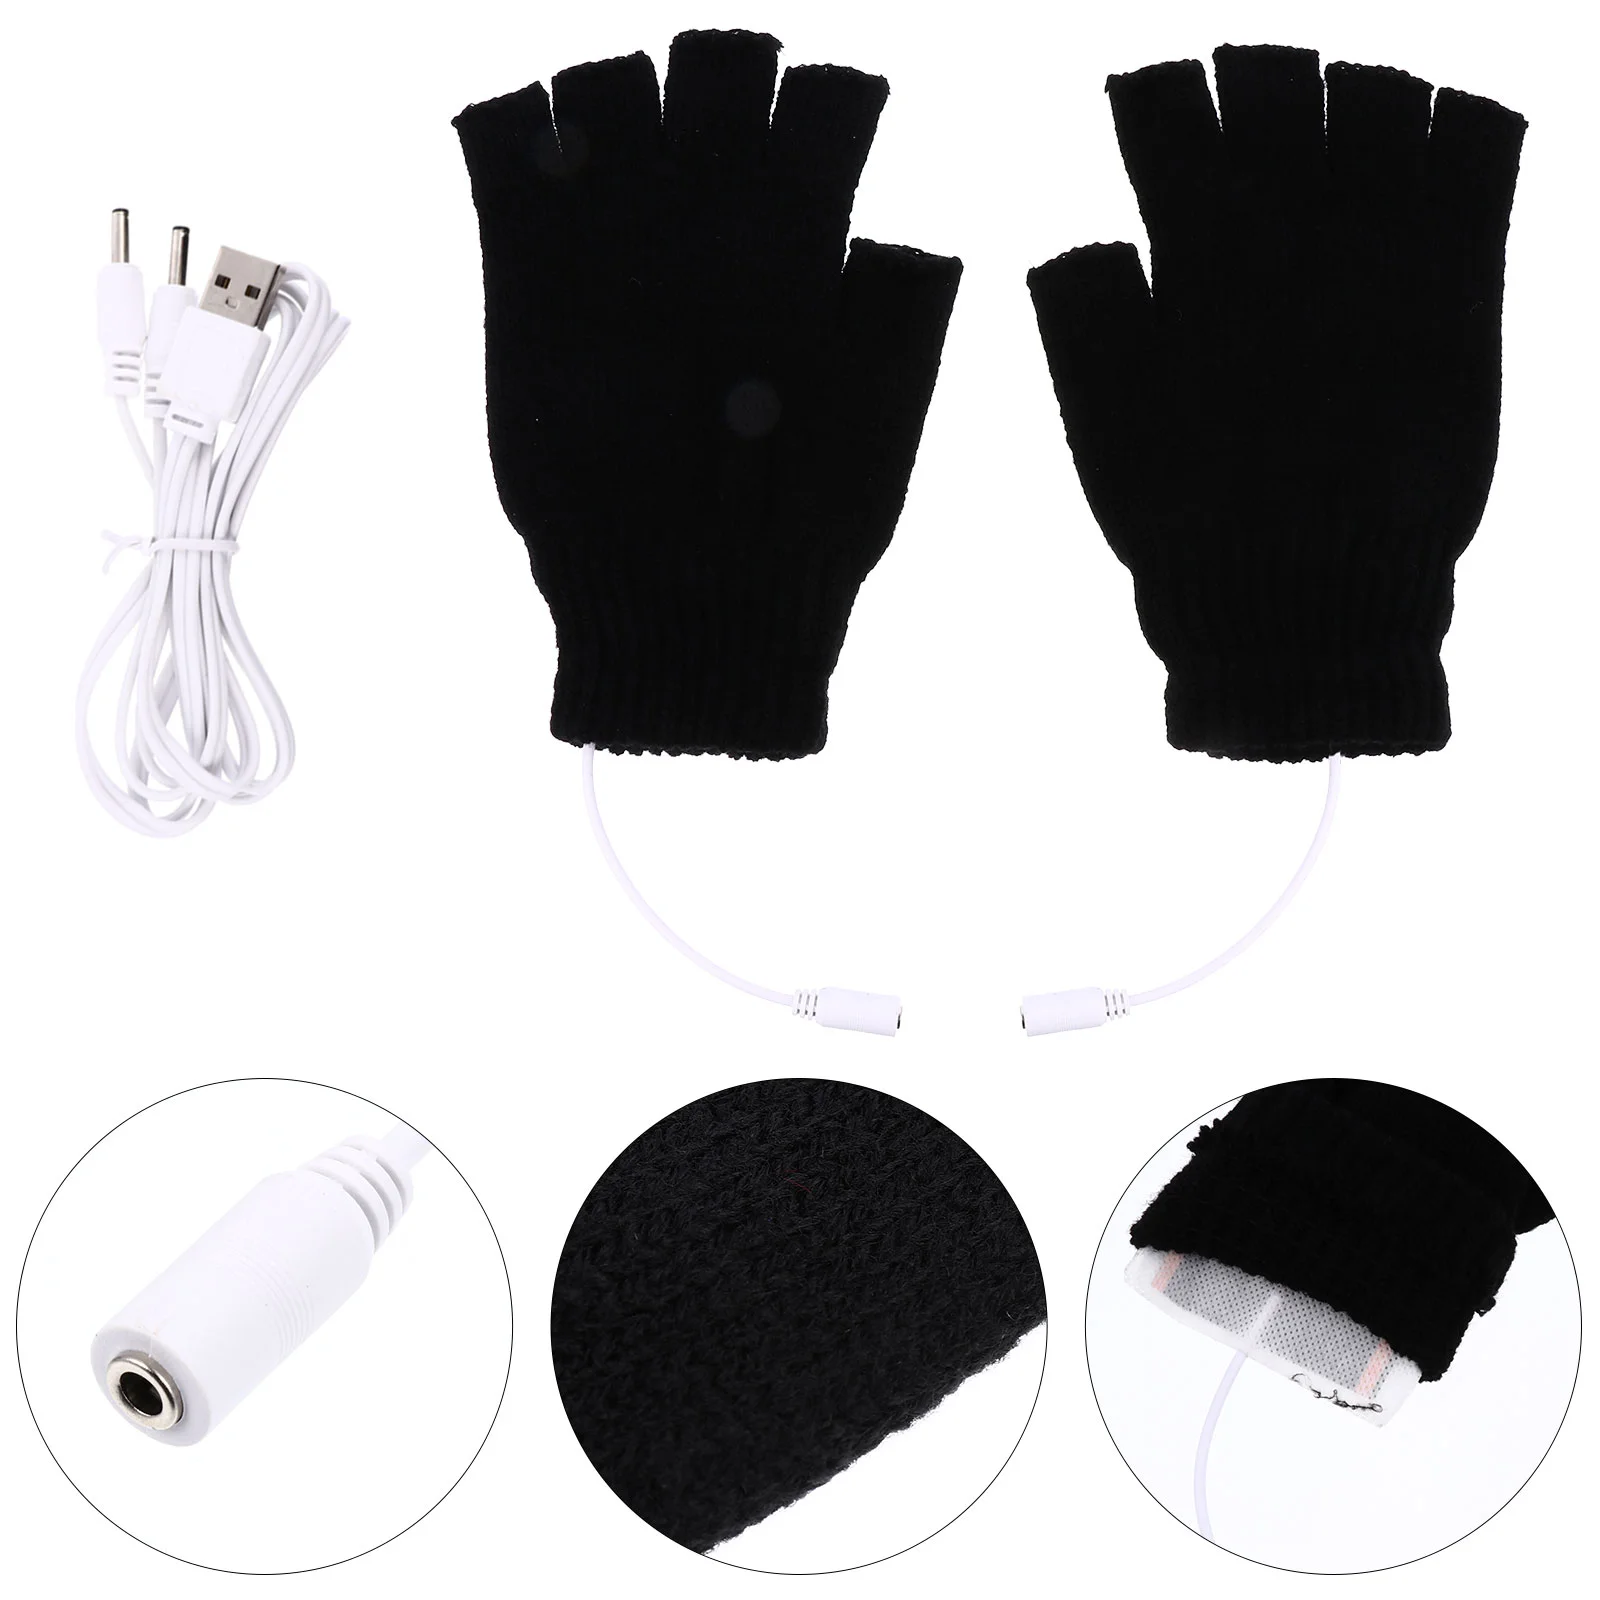 

Bicycle Gloves Heated Cycling Gloves USB Heated Gloves Arthritis Hands Mitten Winter Arthritis Gloves Electric Typing Gloves